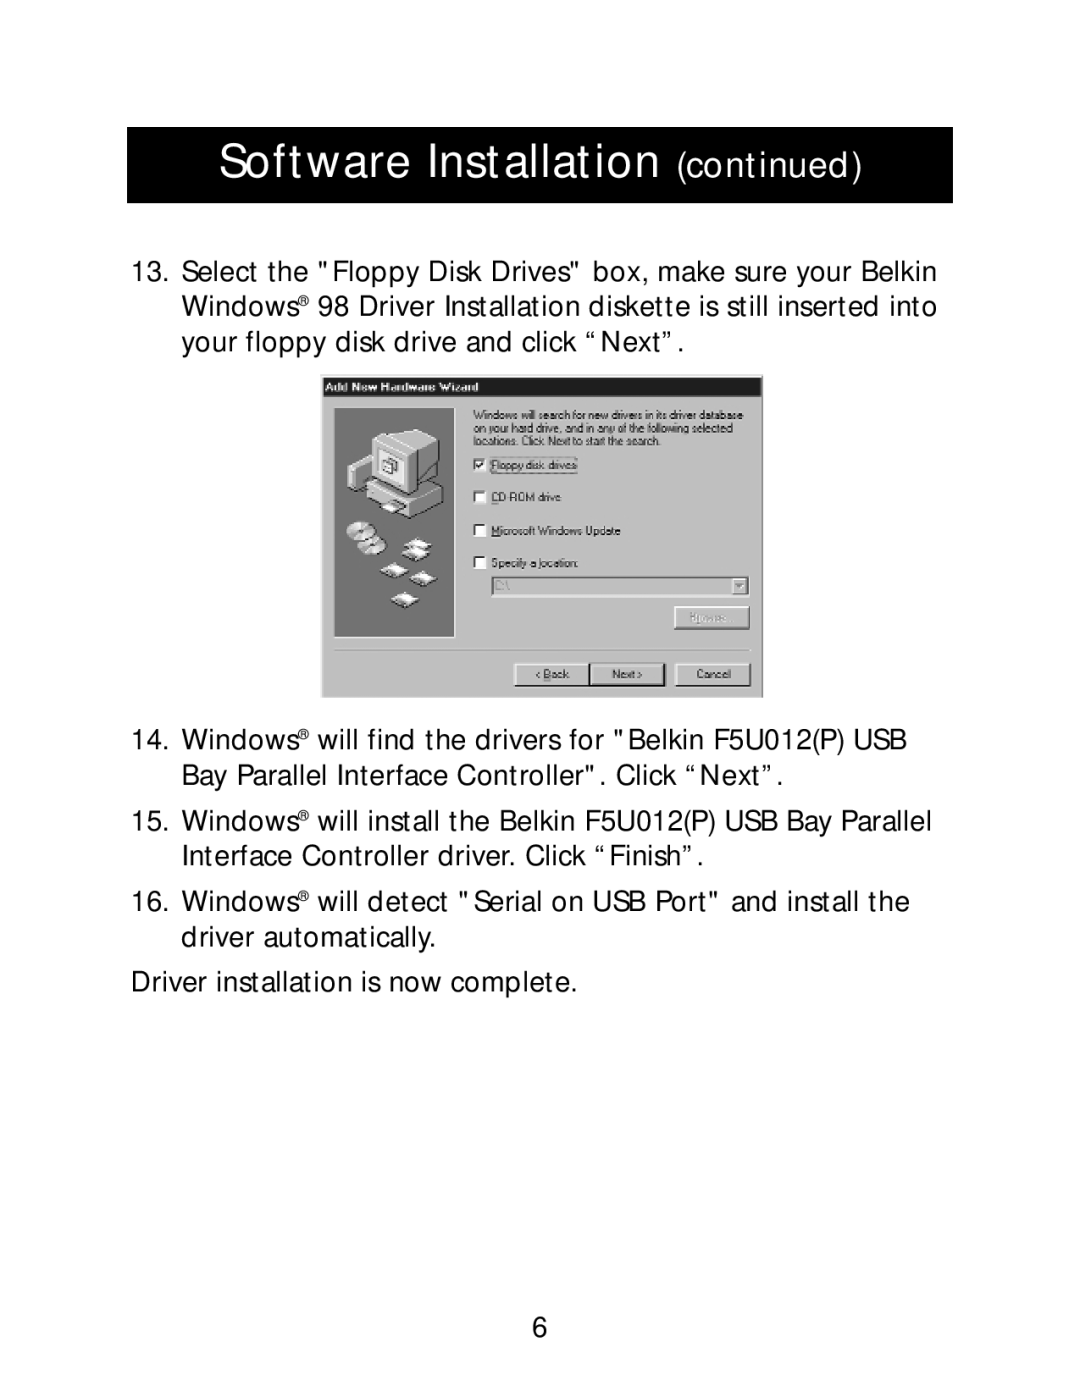 Belkin P73213-A user manual Software Installation continued, Driver installation is now complete 